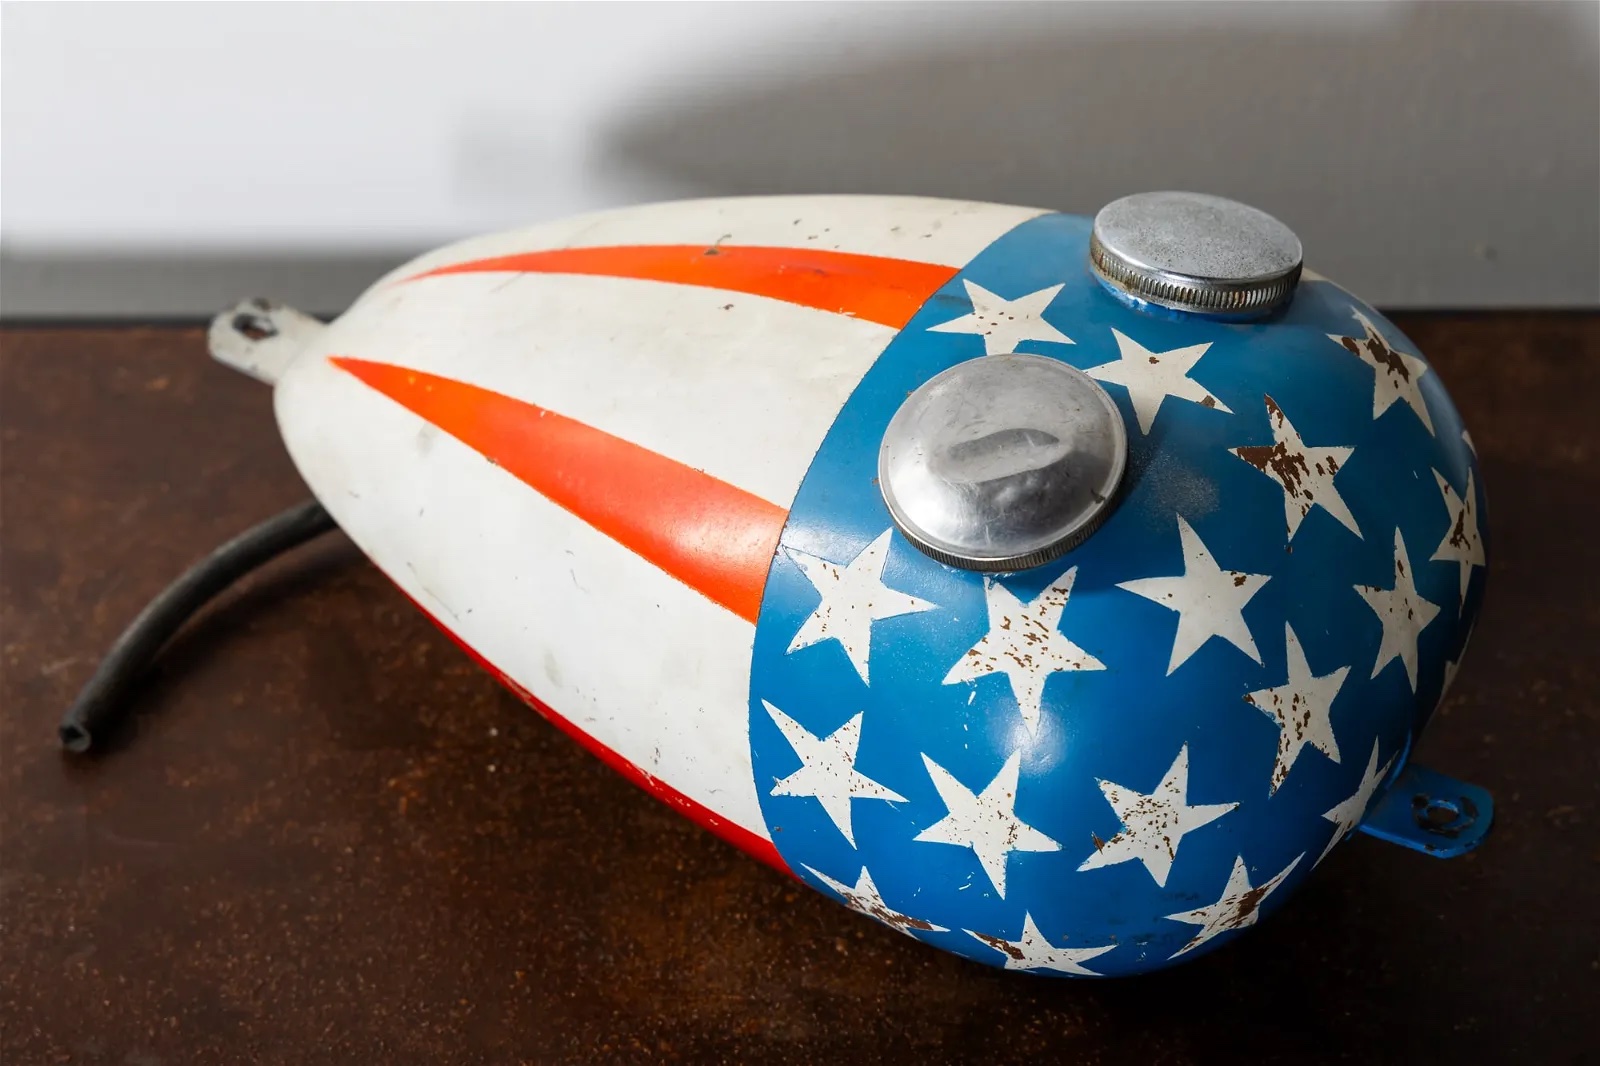 Painted test gas tank for 'Easy Rider,' estimated at $10-$100,000 at Abell.